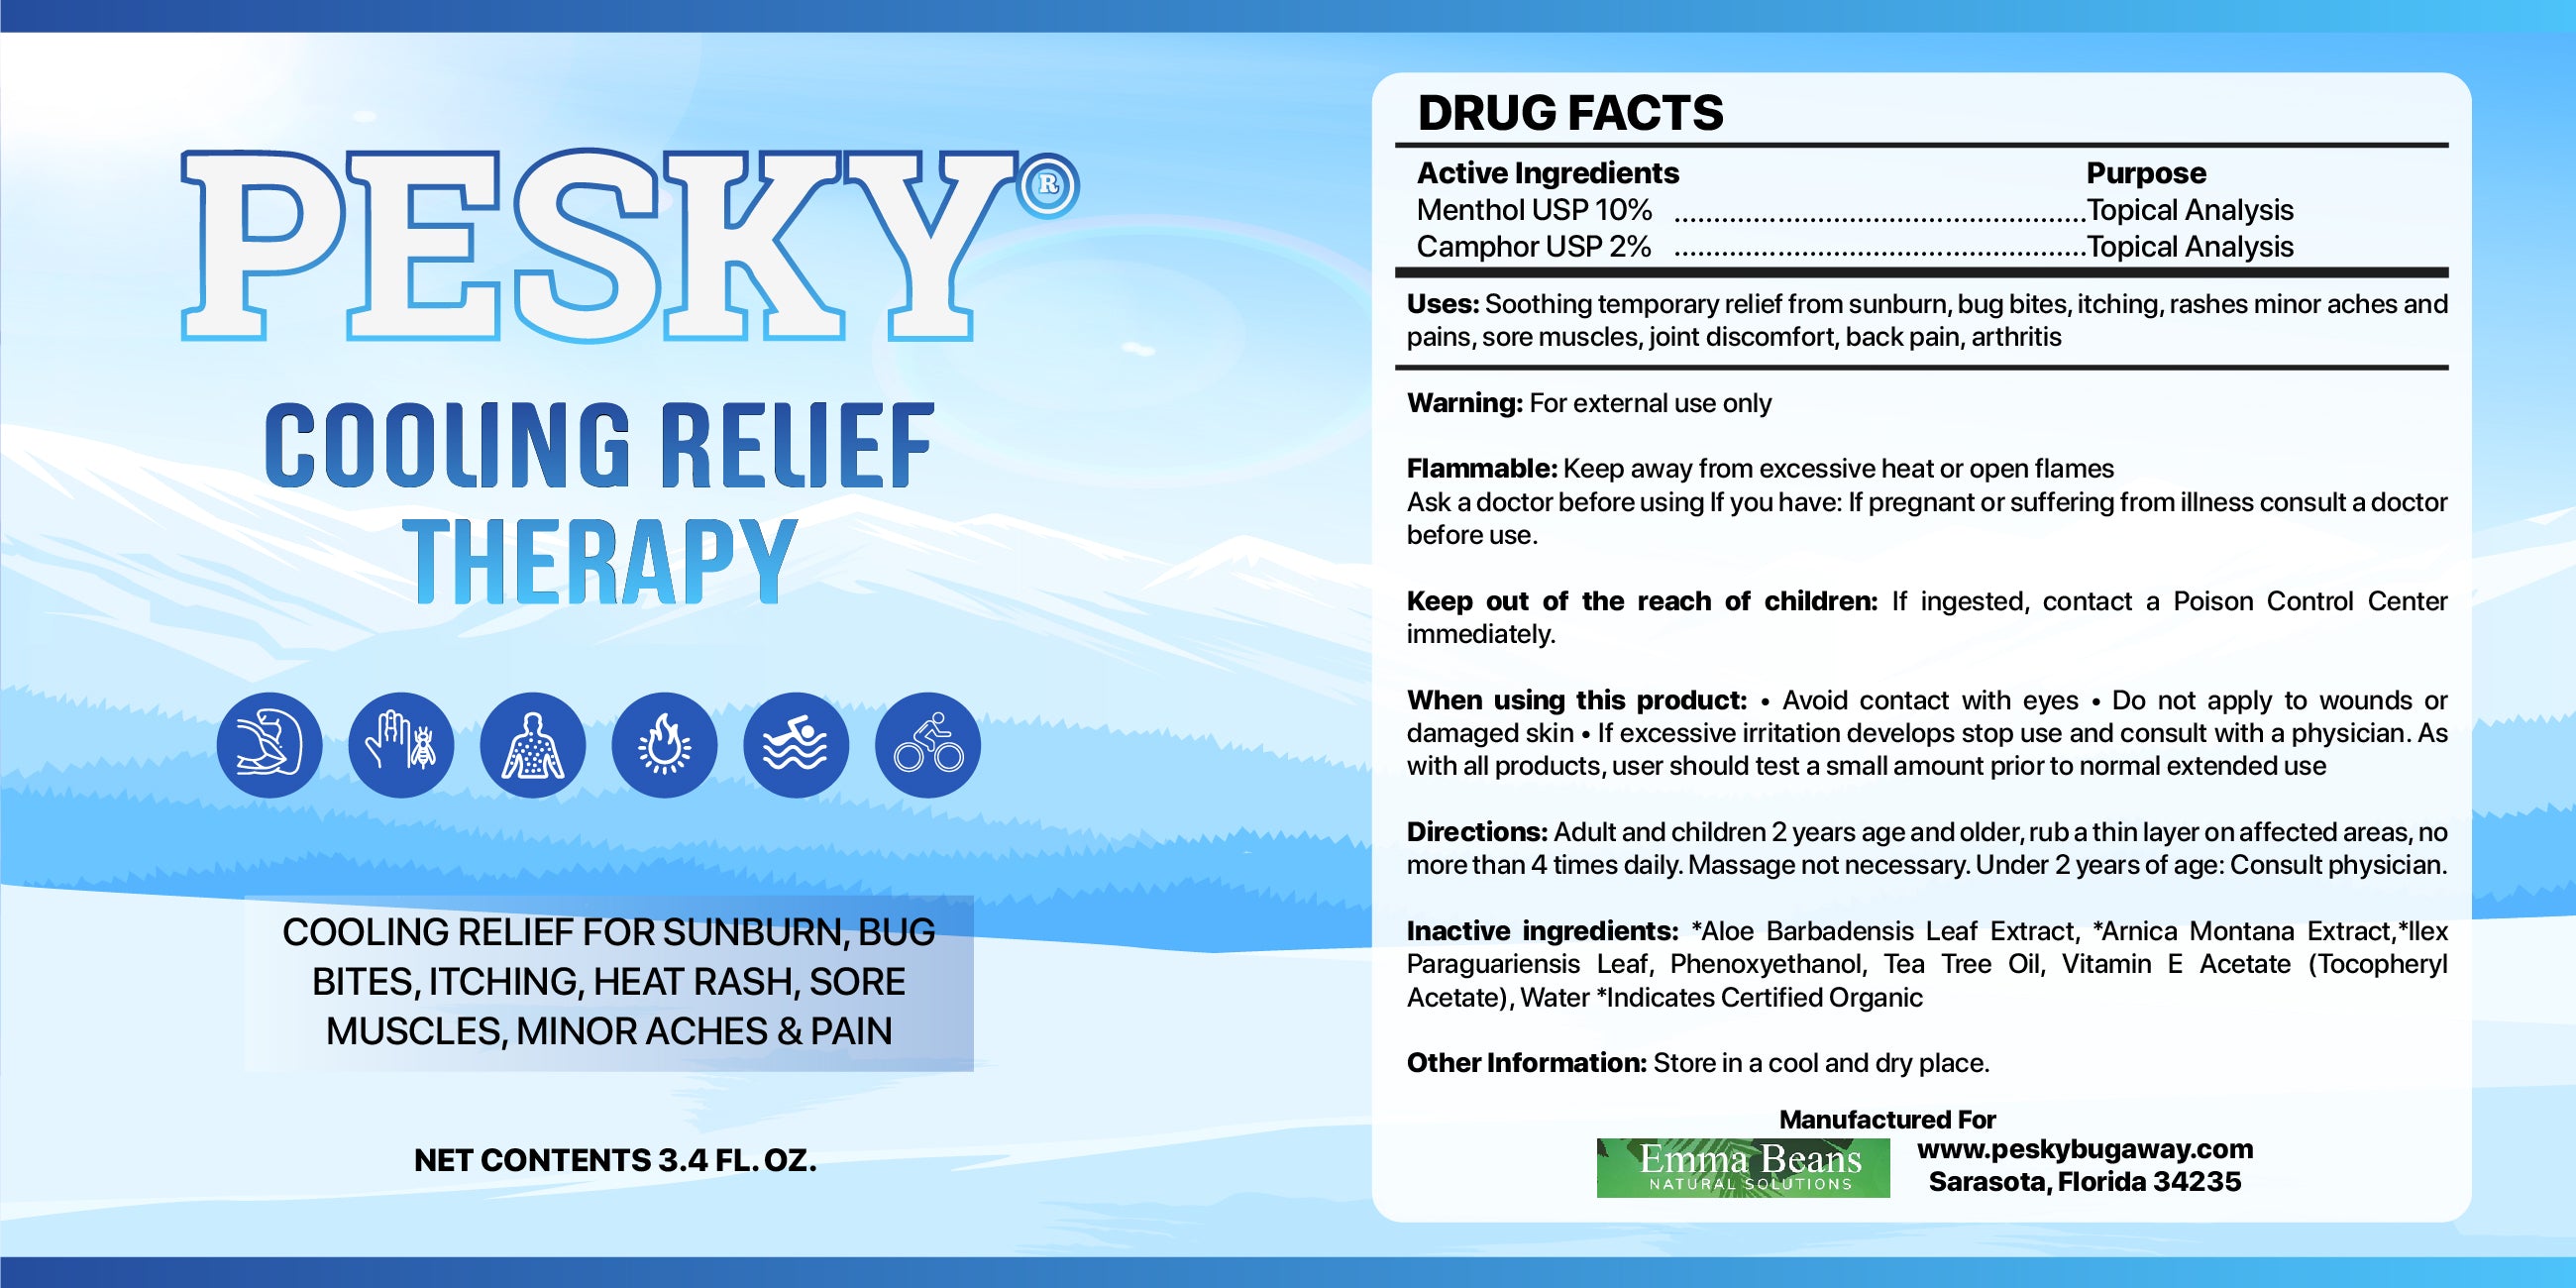 PESKY® Cooling Relief Therapy